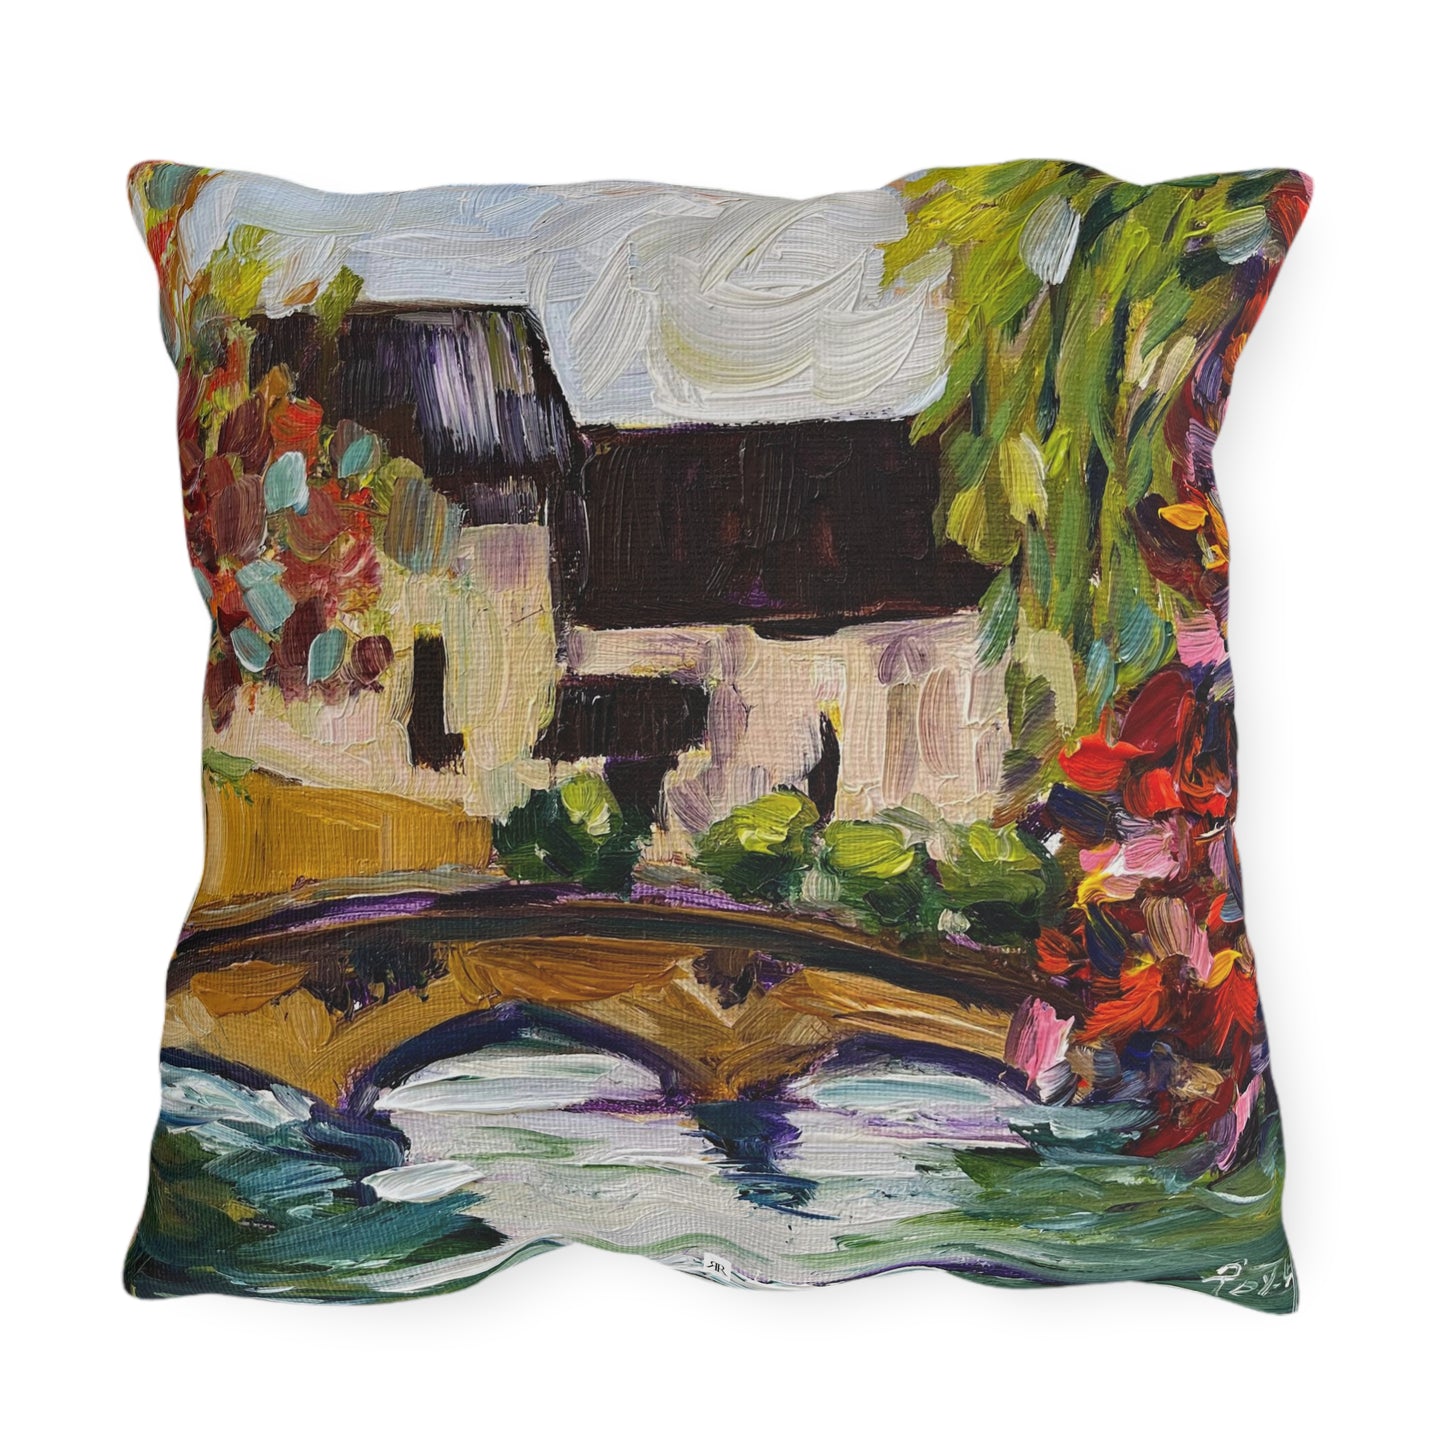 Autumn in Bourton on the Water Cotswolds Outdoor Pillows